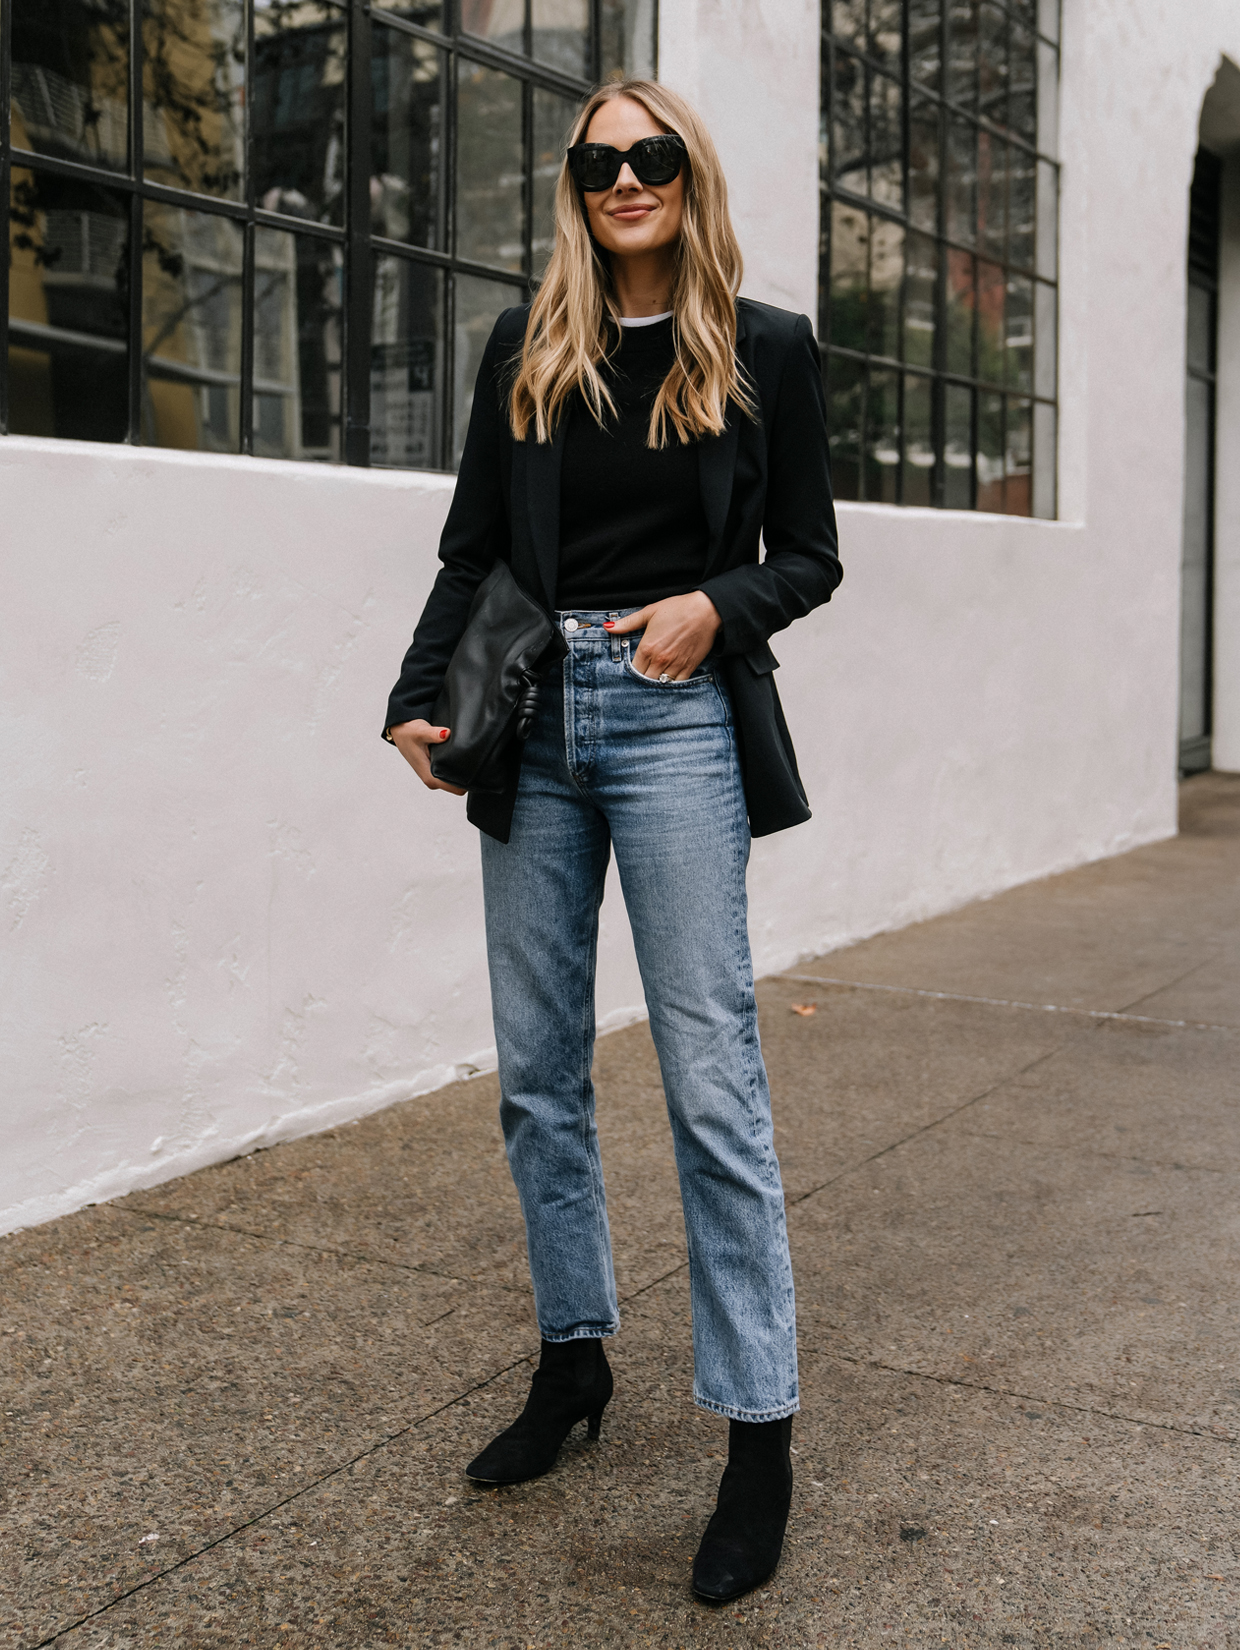 Insister Delvis Faret vild Outfit Ideas with Jeans for Business Casual Days - Fashion Jackson